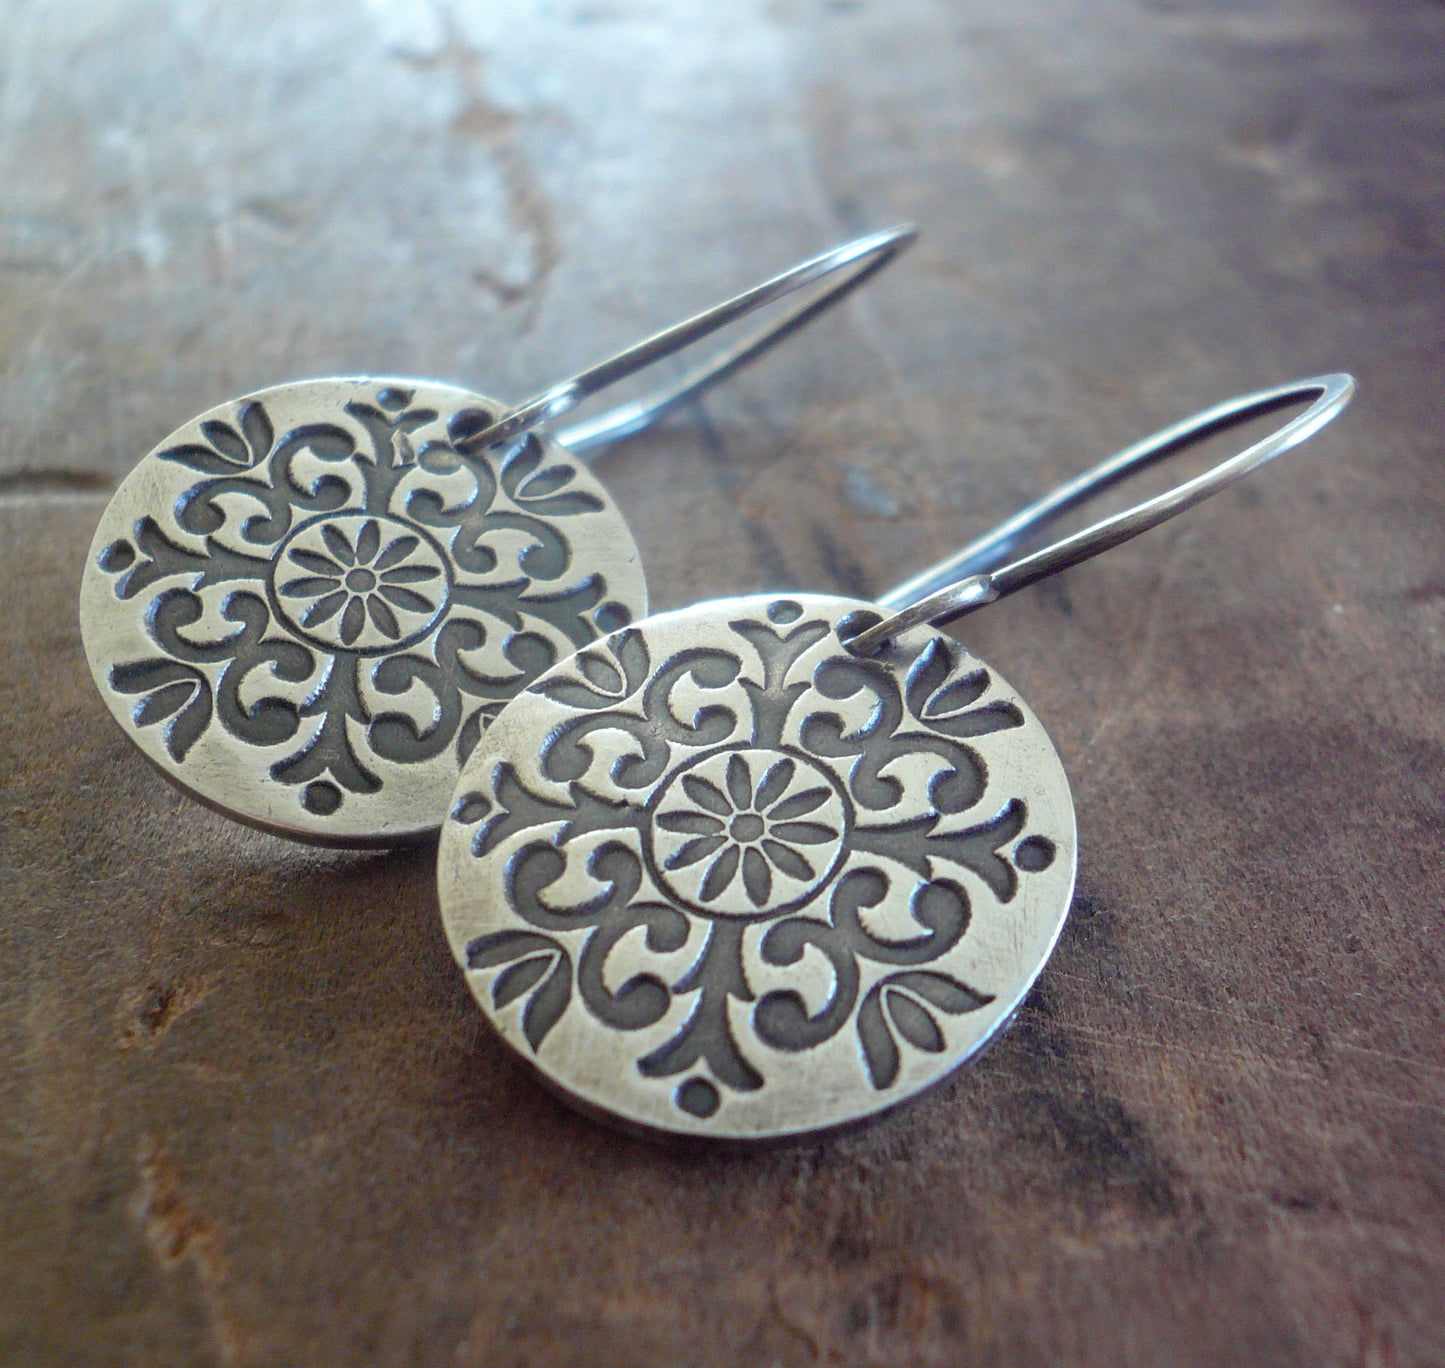 Medallion Earrings Large Style II - Handmade. Oxidized fine and sterling silver